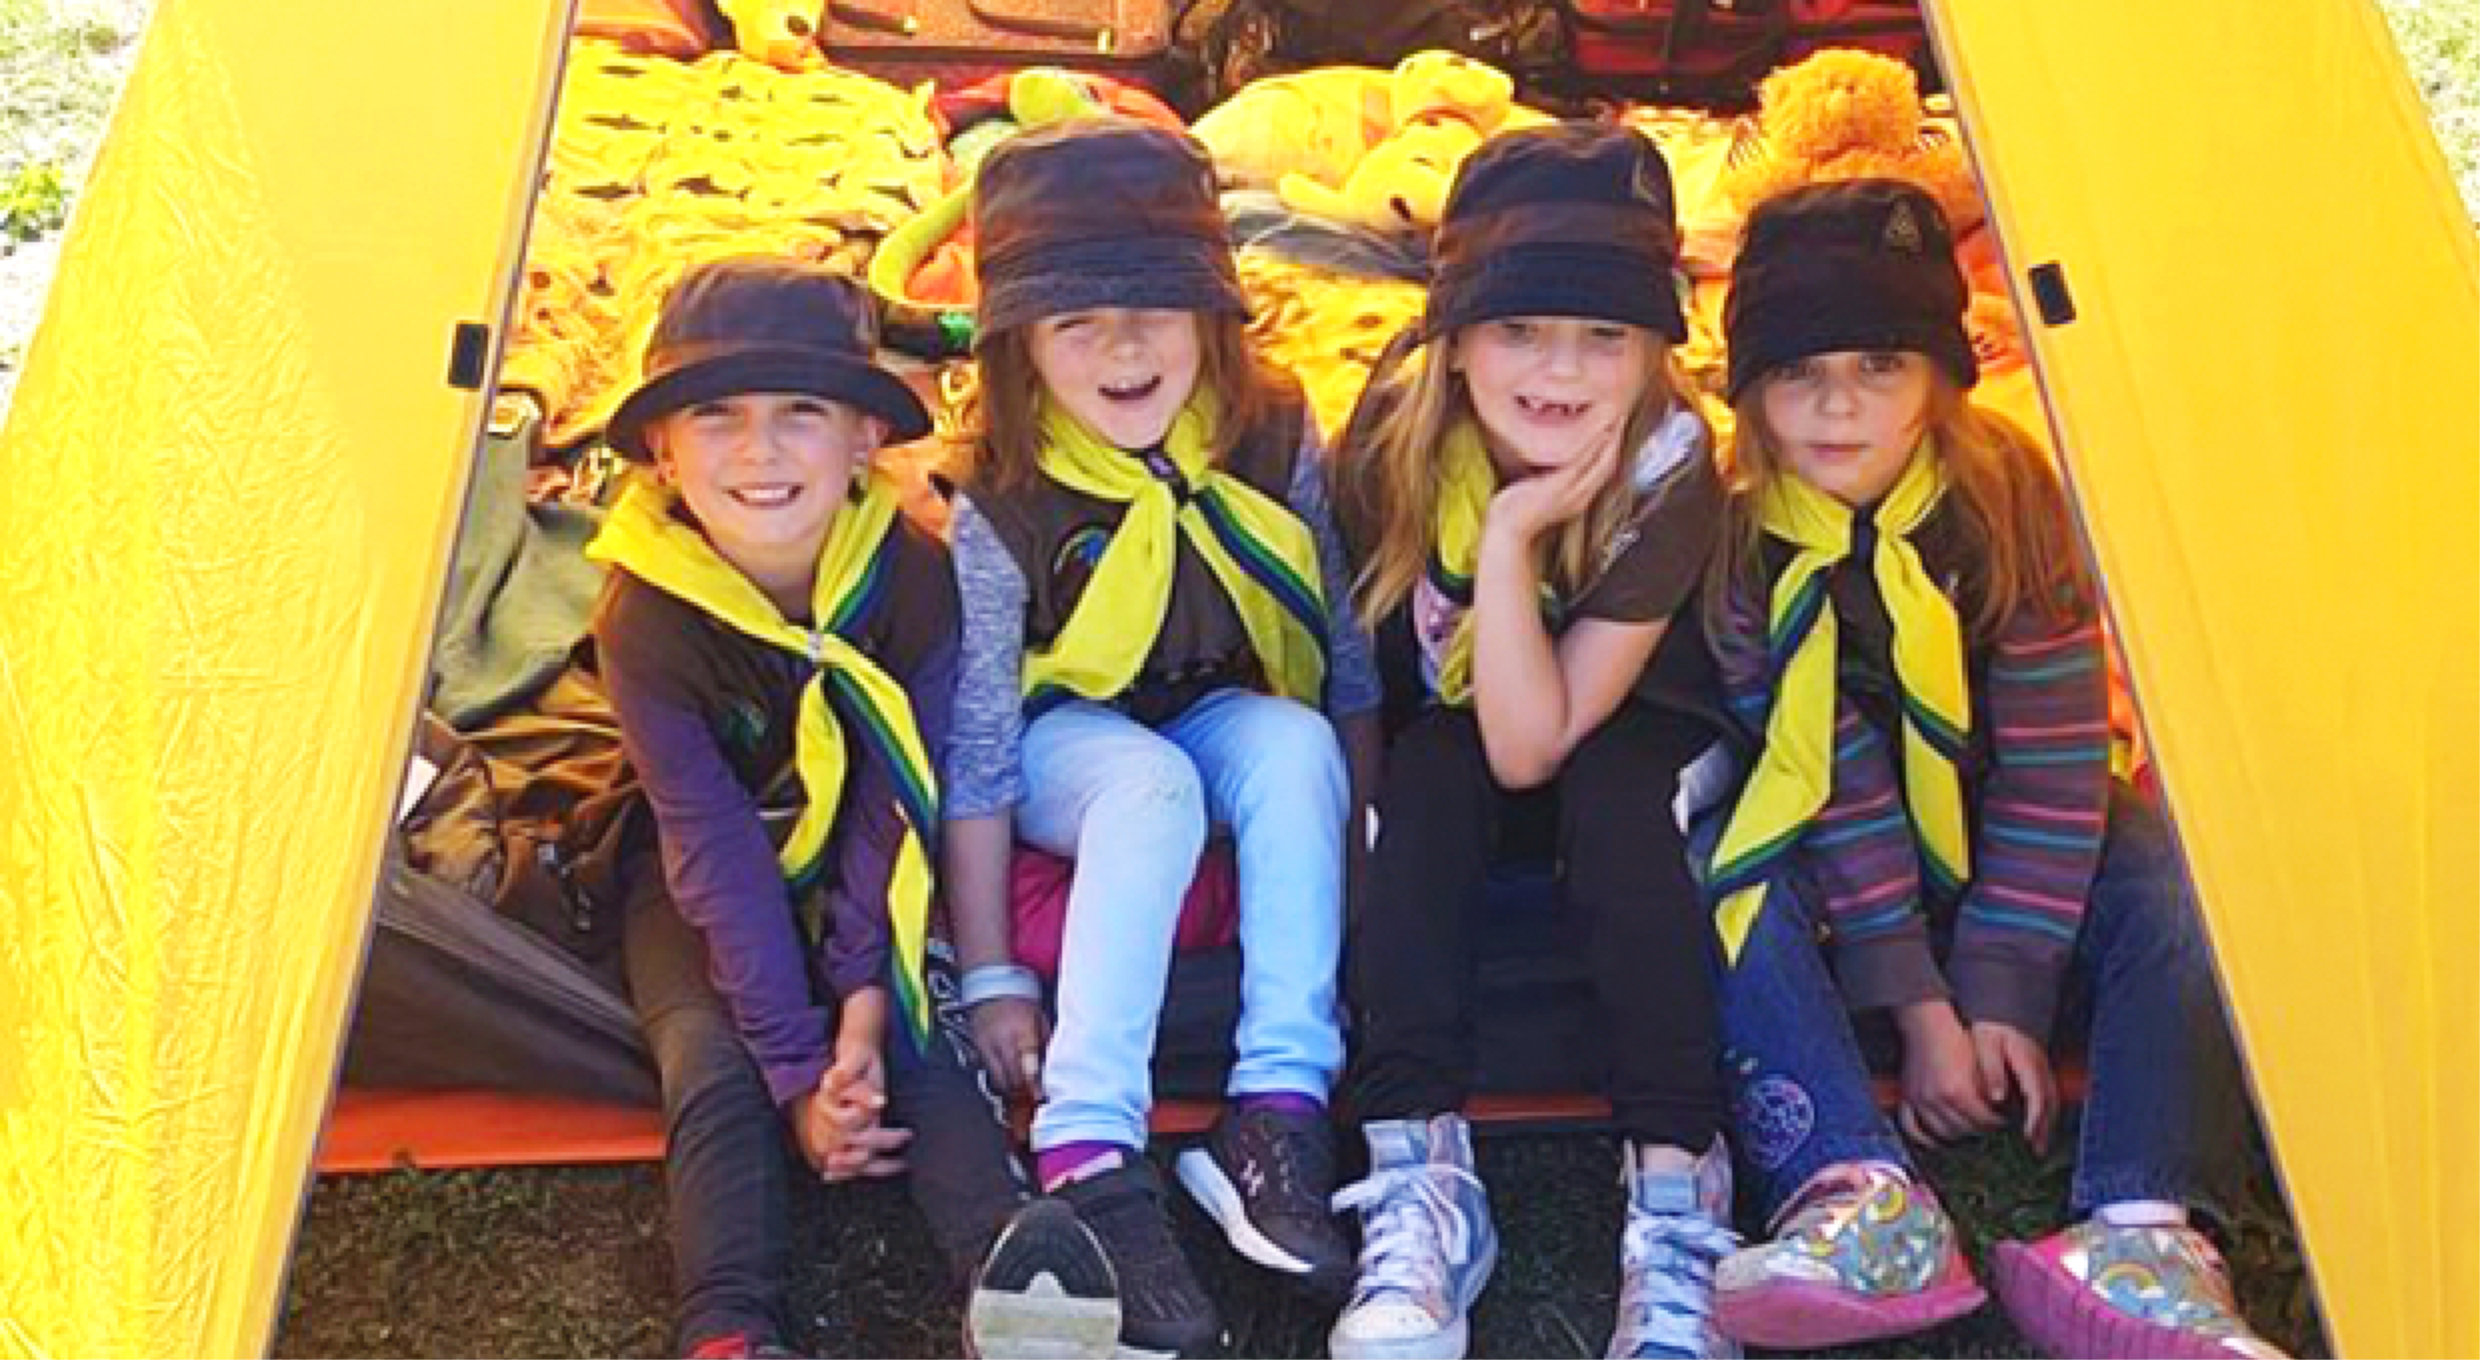 Four girl Beaver Scouts sitting together and posing for the camera while smiling and having fun.